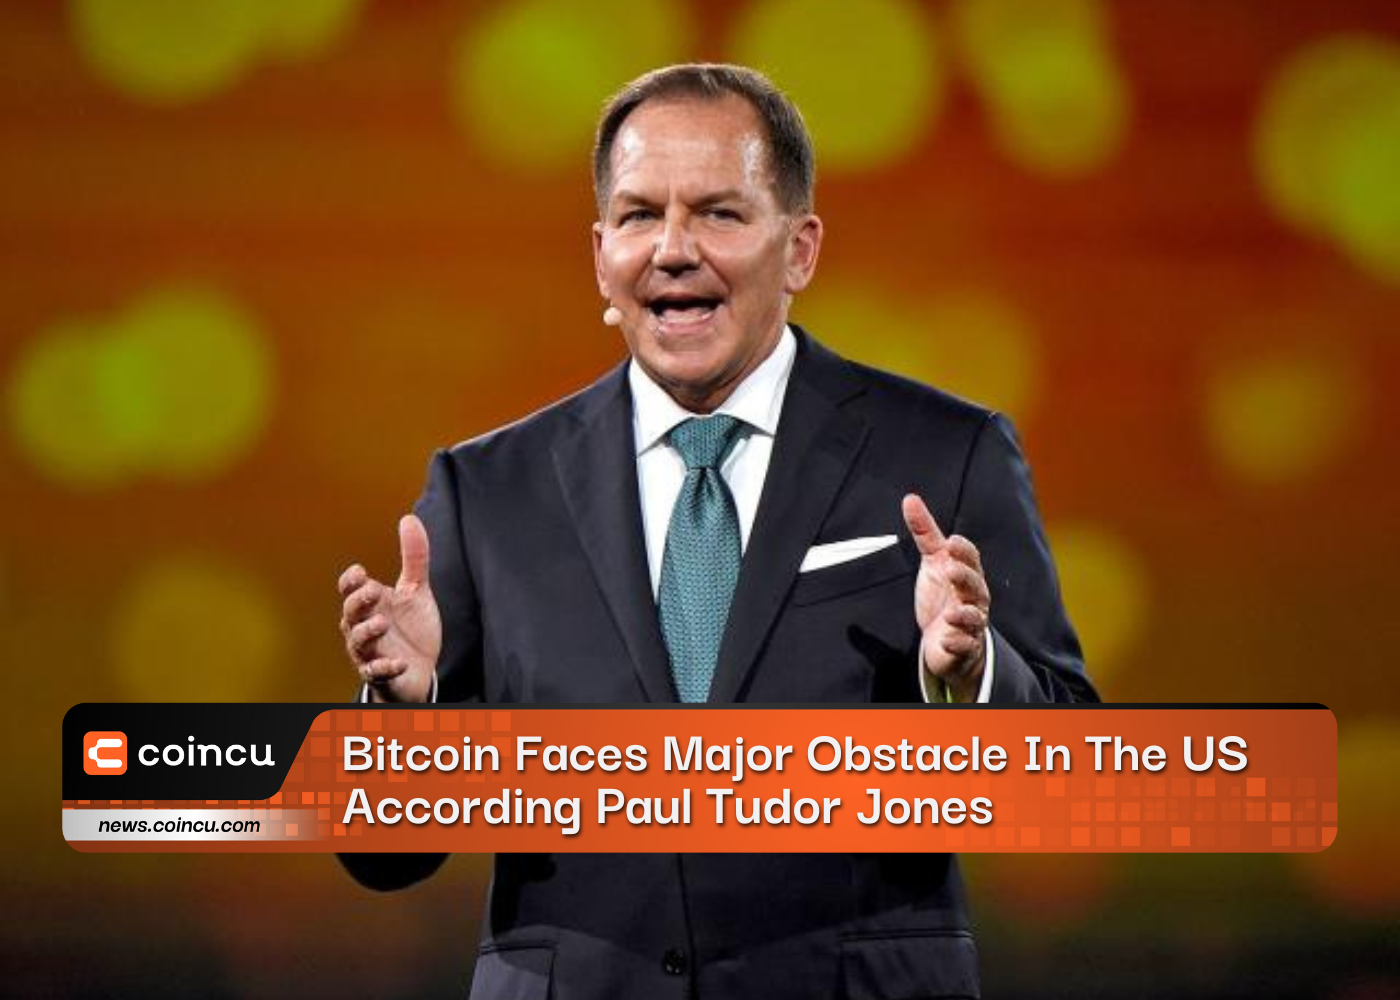 Bitcoin Faces Major Obstacle In The US